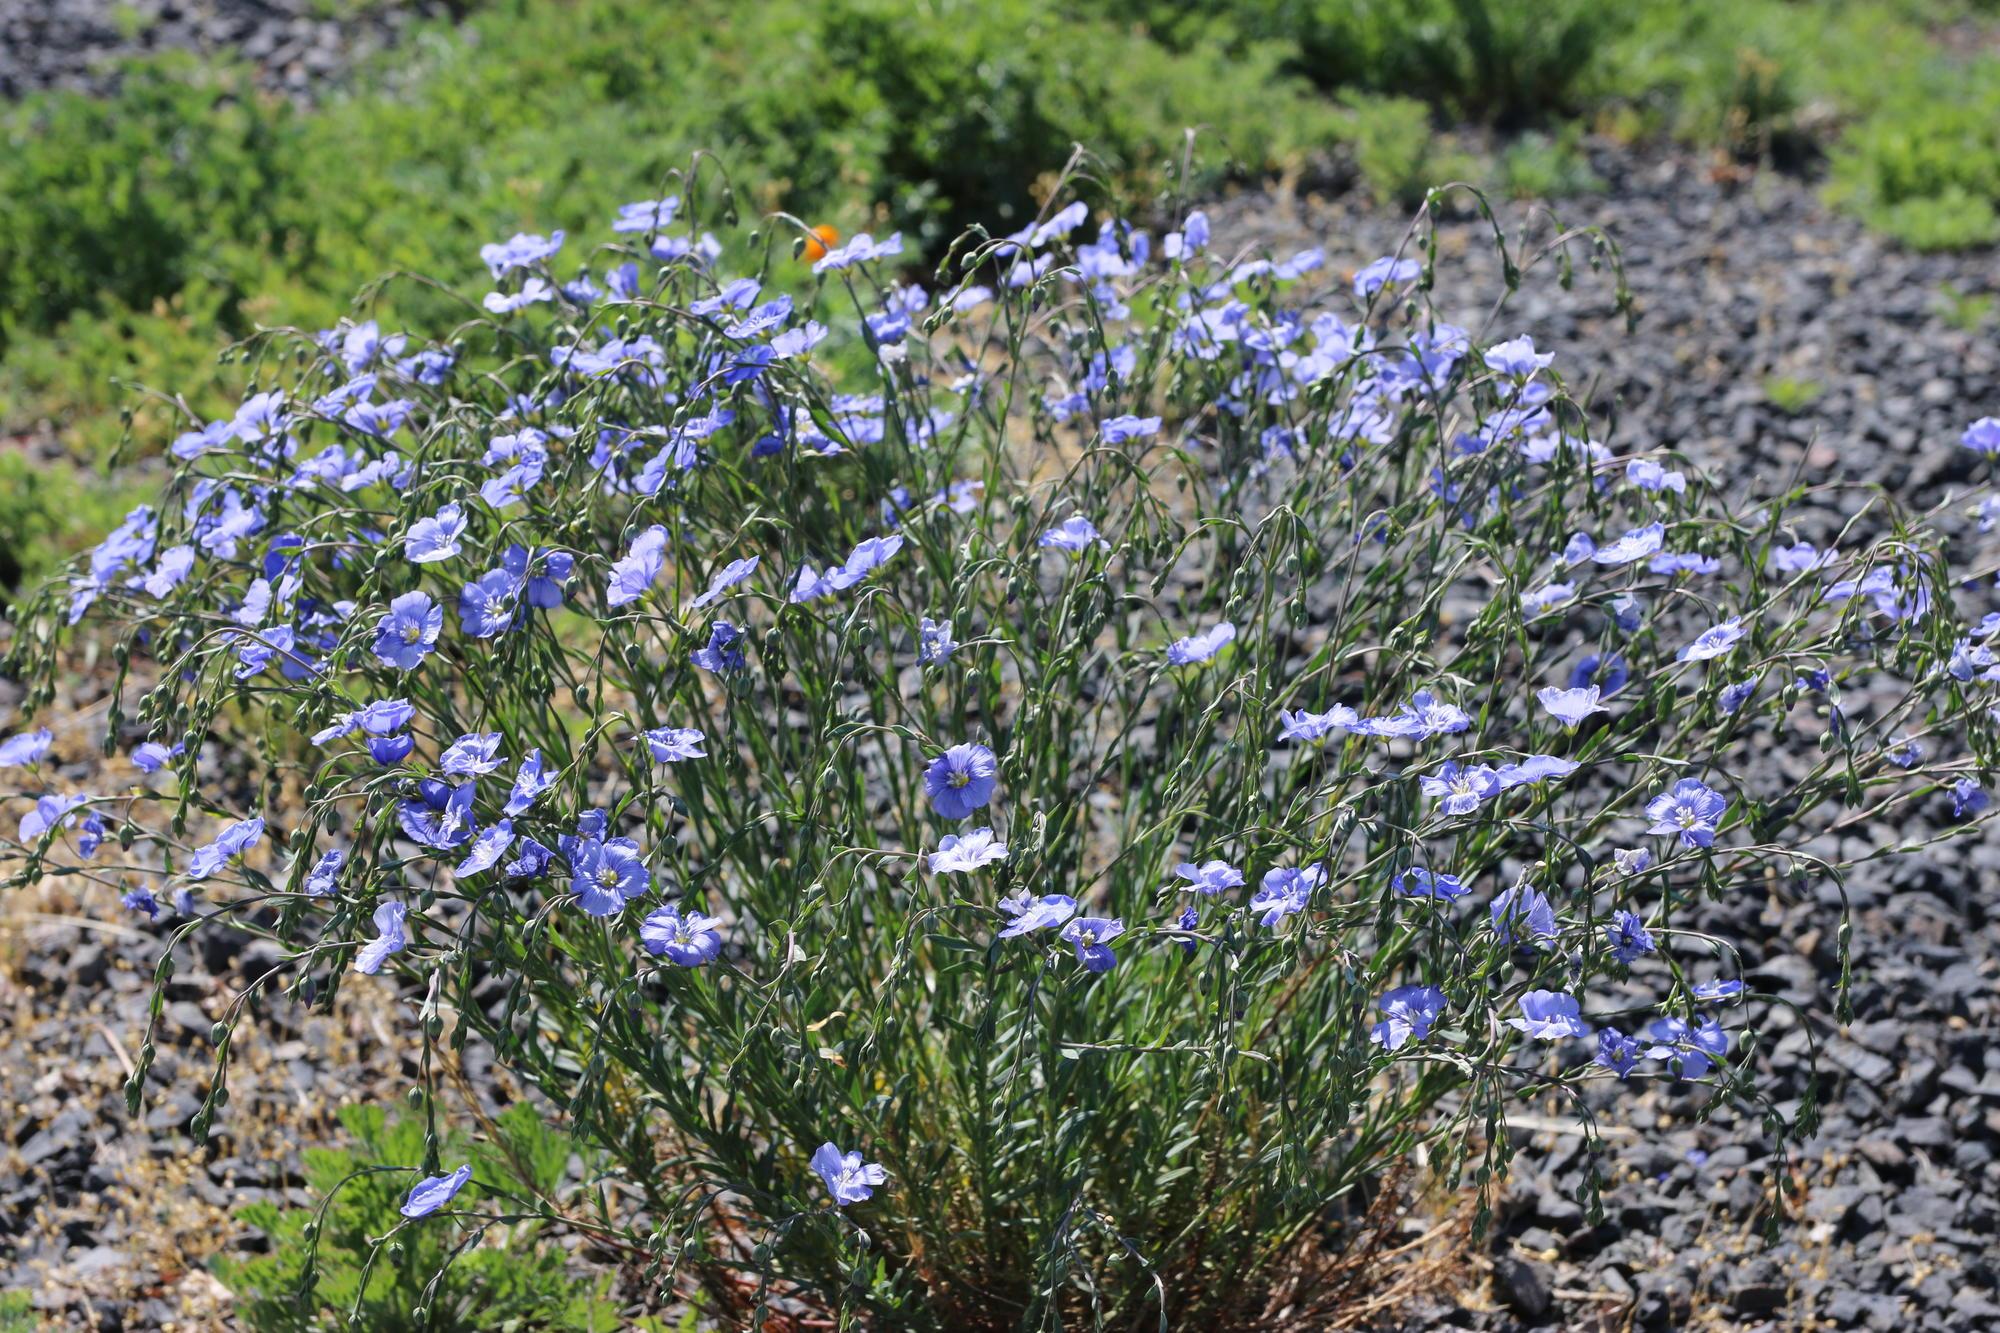 Blue flax, light-colored flowers atop feathery foliage